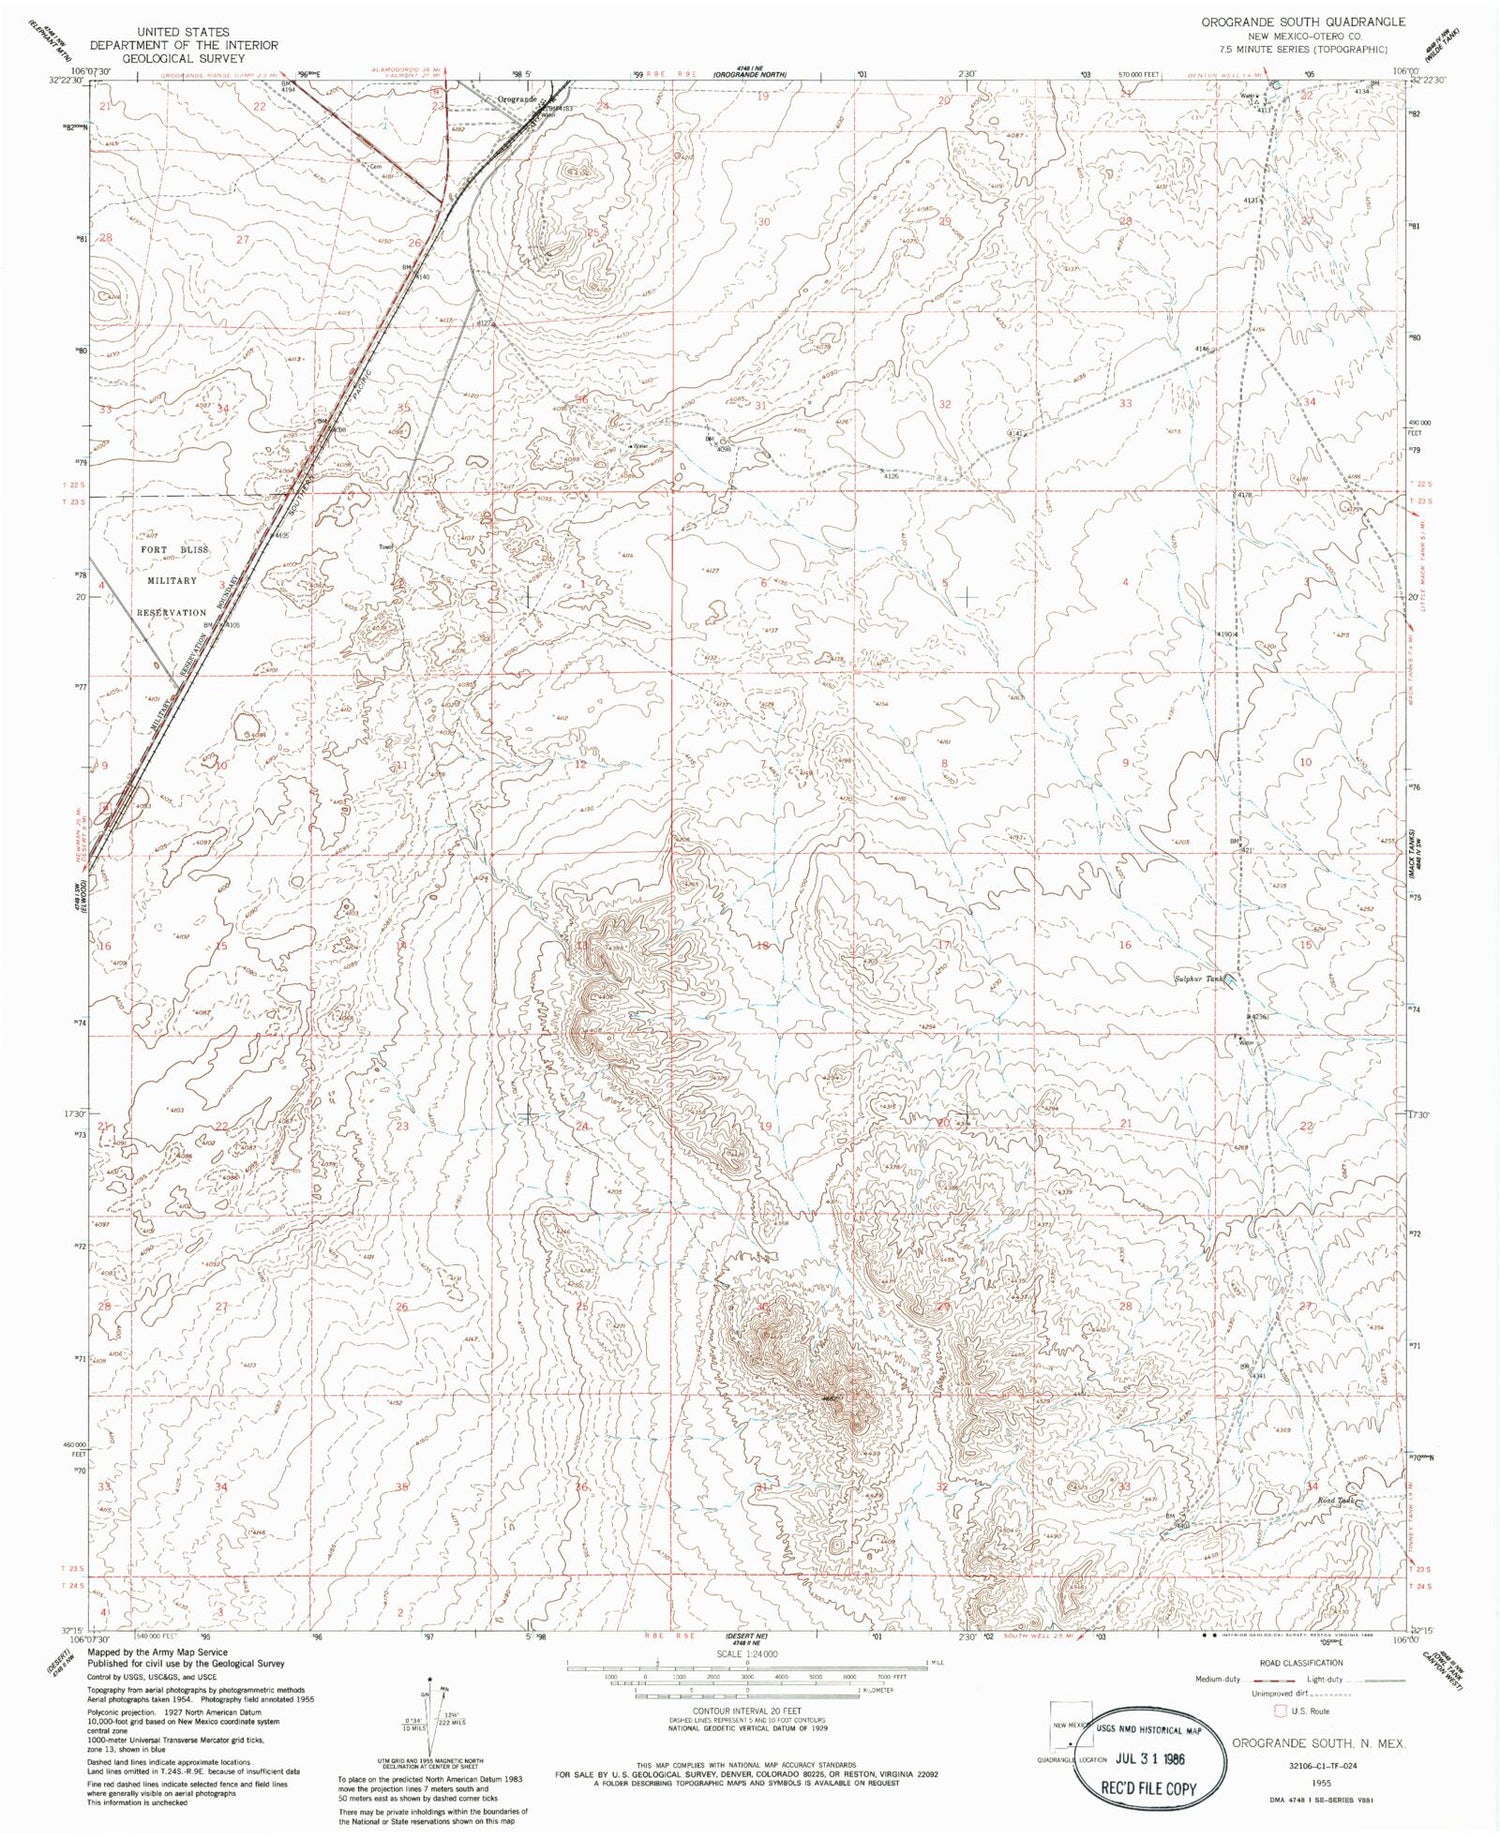 Classic USGS Orogrande South New Mexico 7.5'x7.5' Topo Map Image